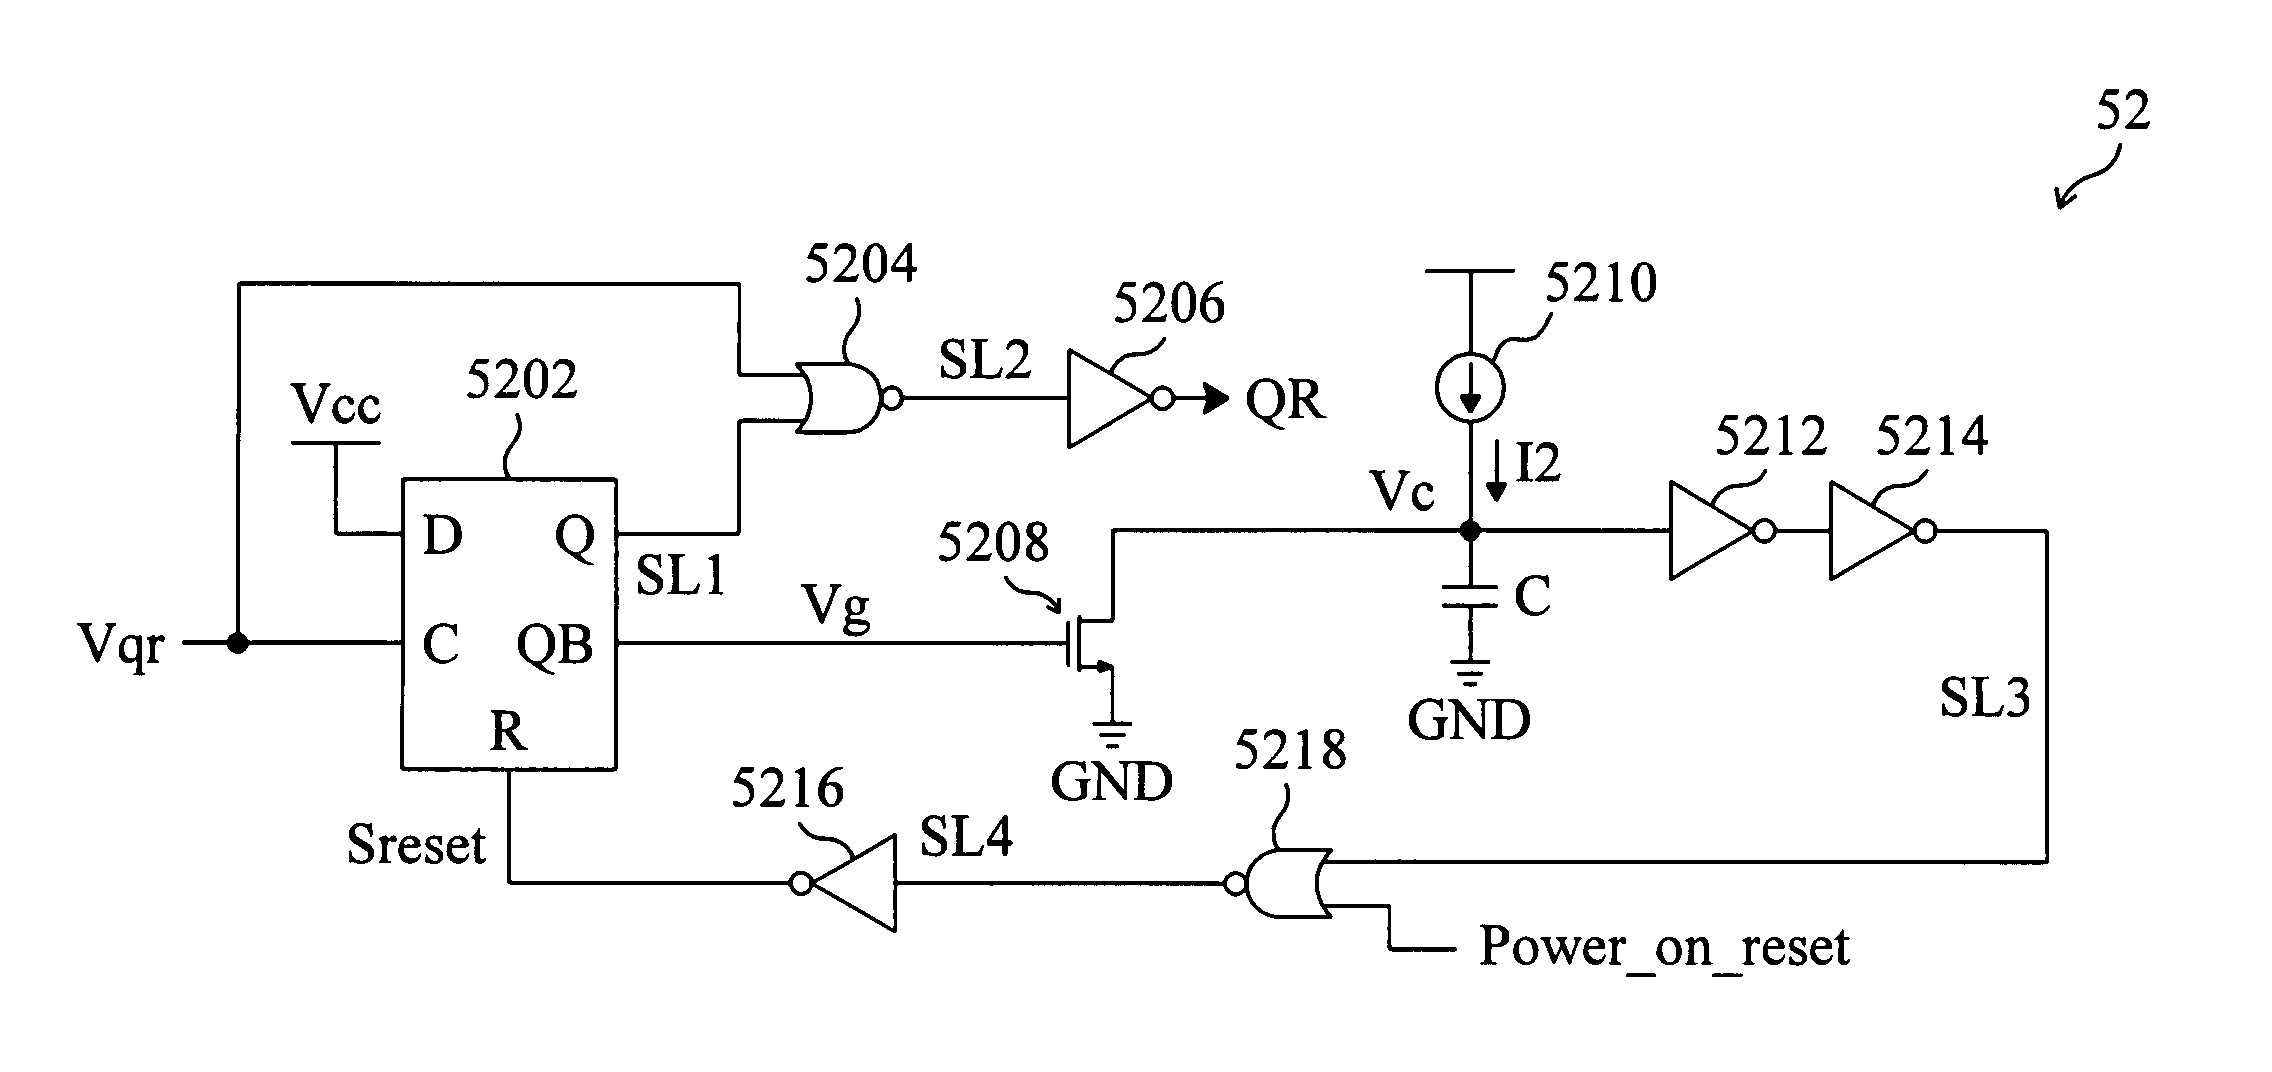 Quick response mechanism and method for a switching power system